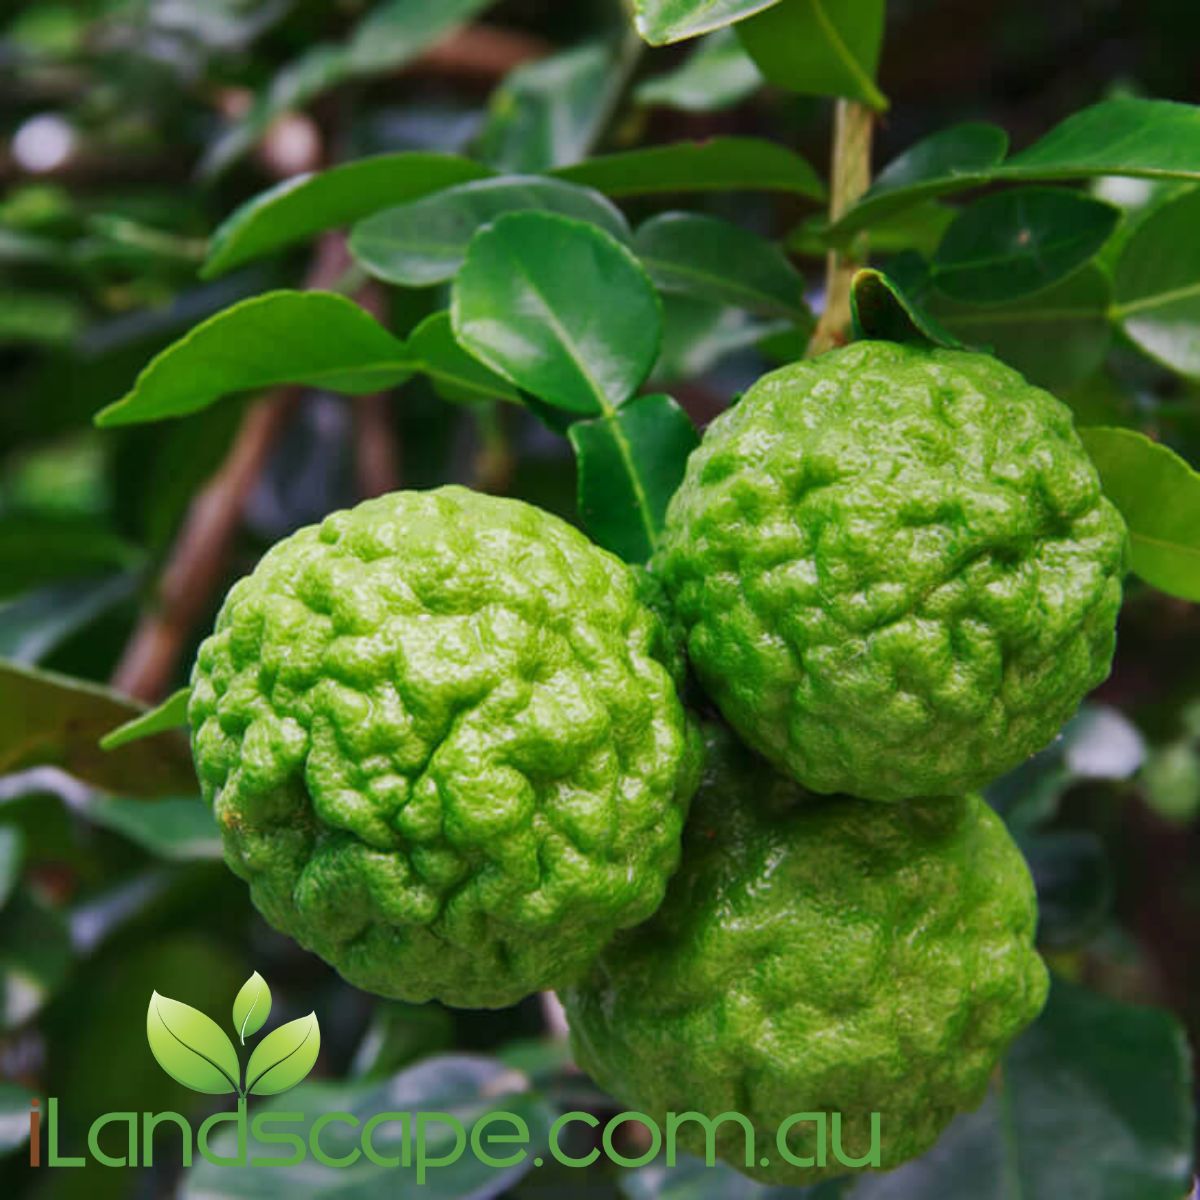 Citrus Kaffir Lime (citrus hystrix) is also know by makrut lime, is commonly used in Asian cuisine   grow to approx 1.5m tall and is best grown in Pots and kept using regular pruning or picking of its leaves   Feed seasonally using citrus food  Prune regular to keep it tight and to increase your fruit yield. Feed seasonally using a Citrus food and possibly more when in flower and fruiting 